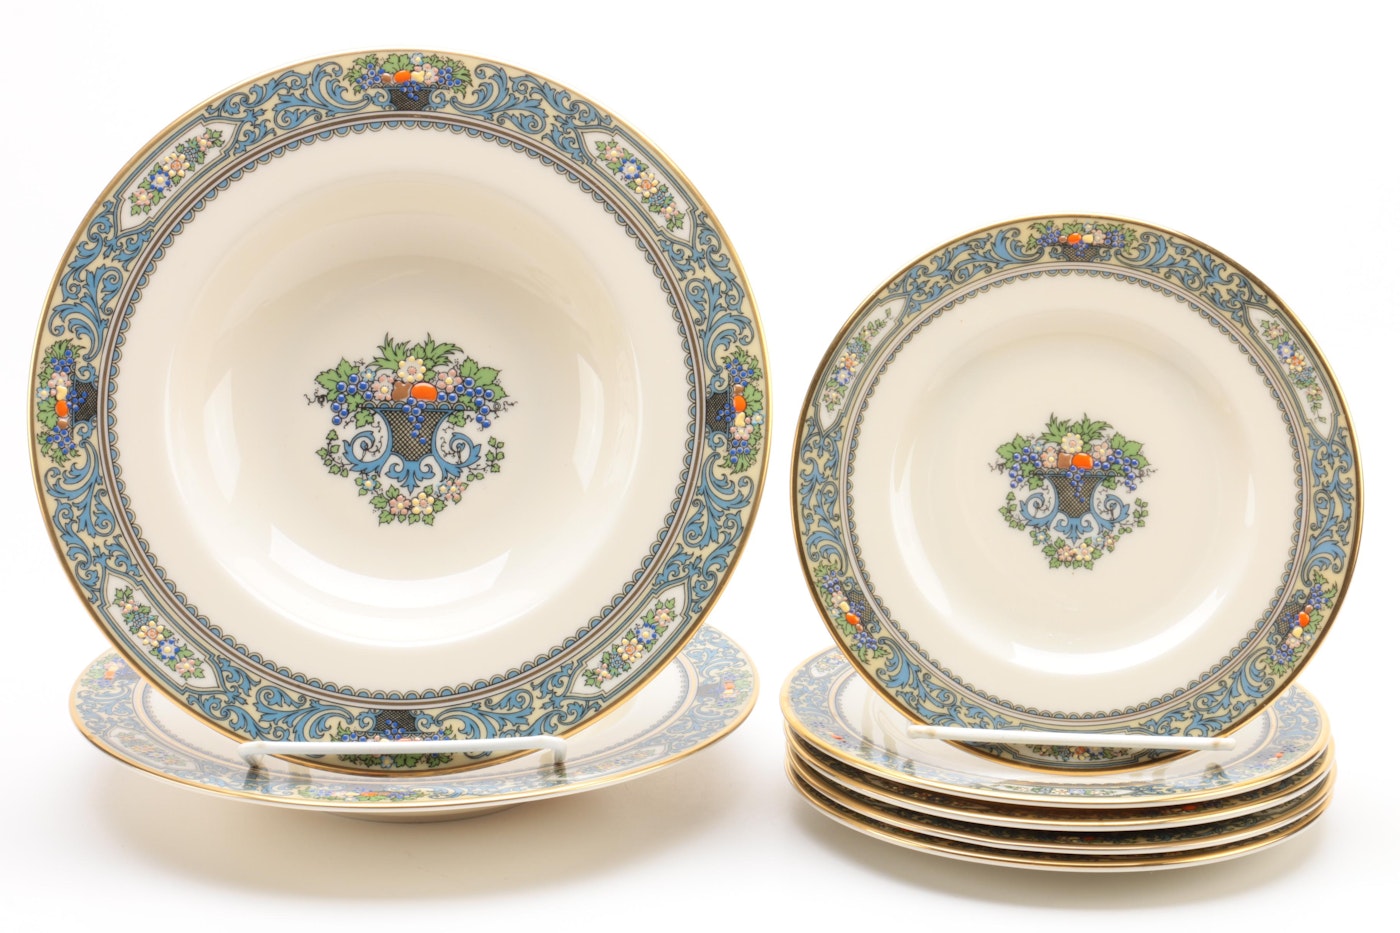 Lenox Presidential Collection 